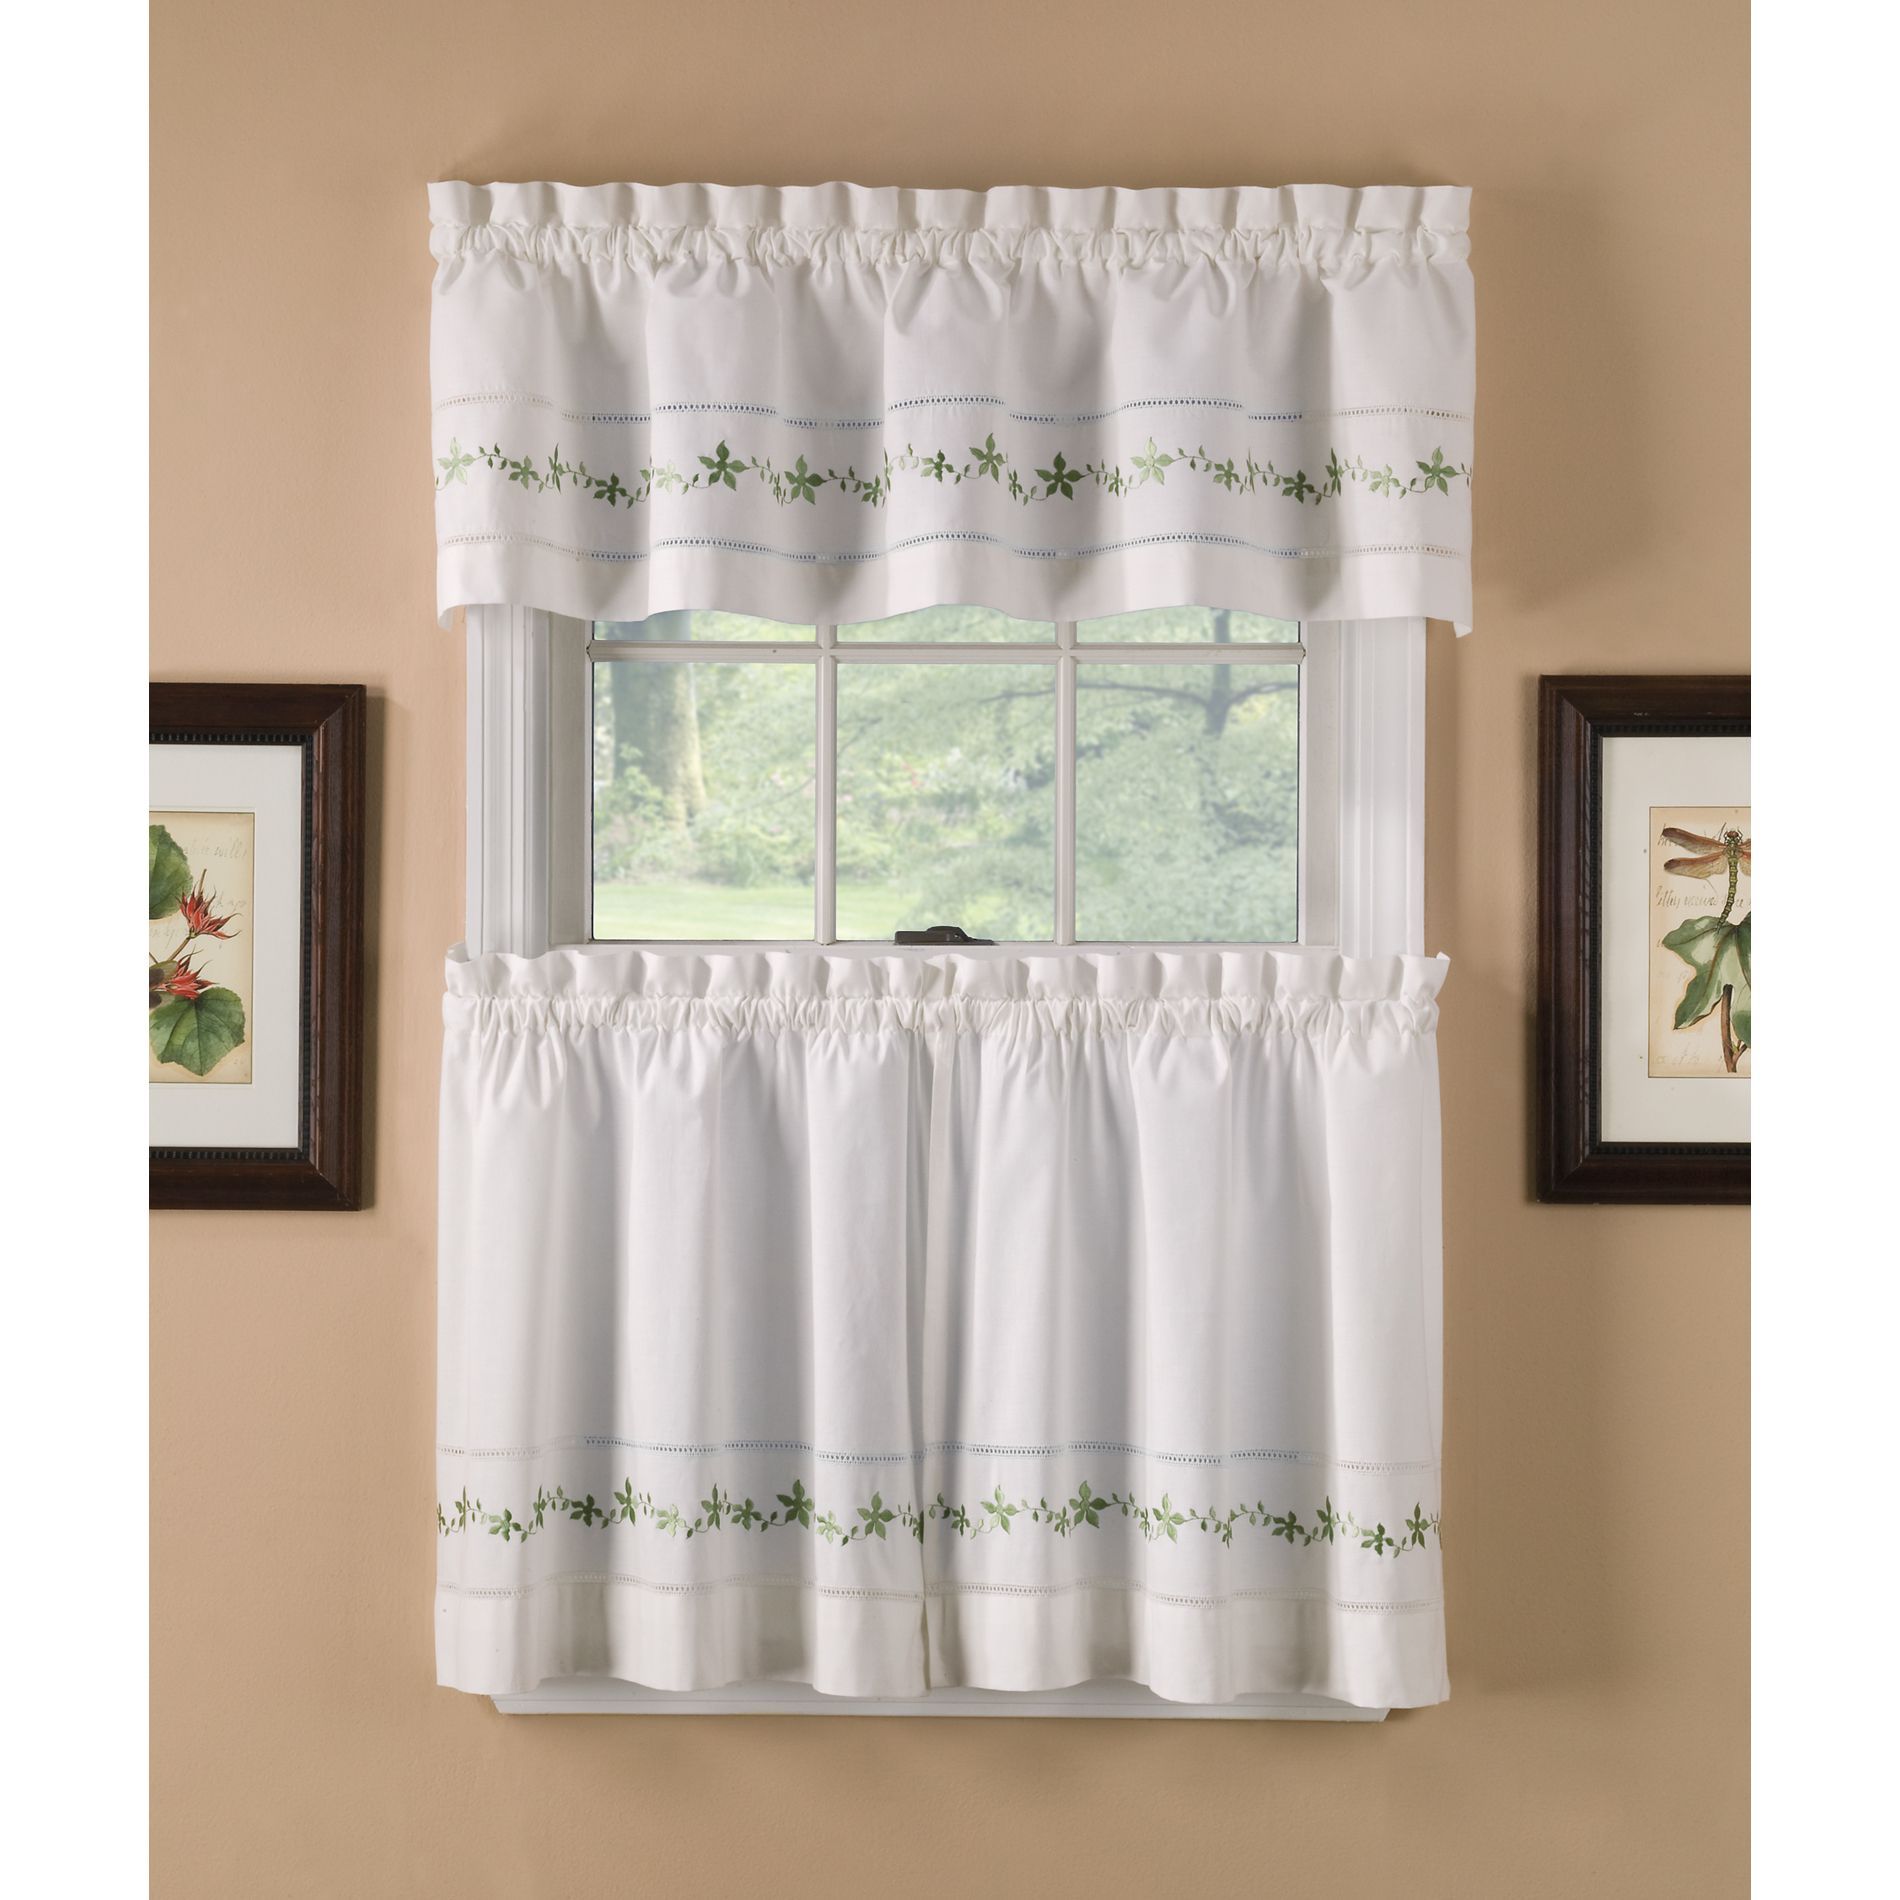 Stunning Priscilla Curtains Sears Double Wide Valances With Elegant White Priscilla Lace Kitchen Curtain Pieces (View 19 of 20)